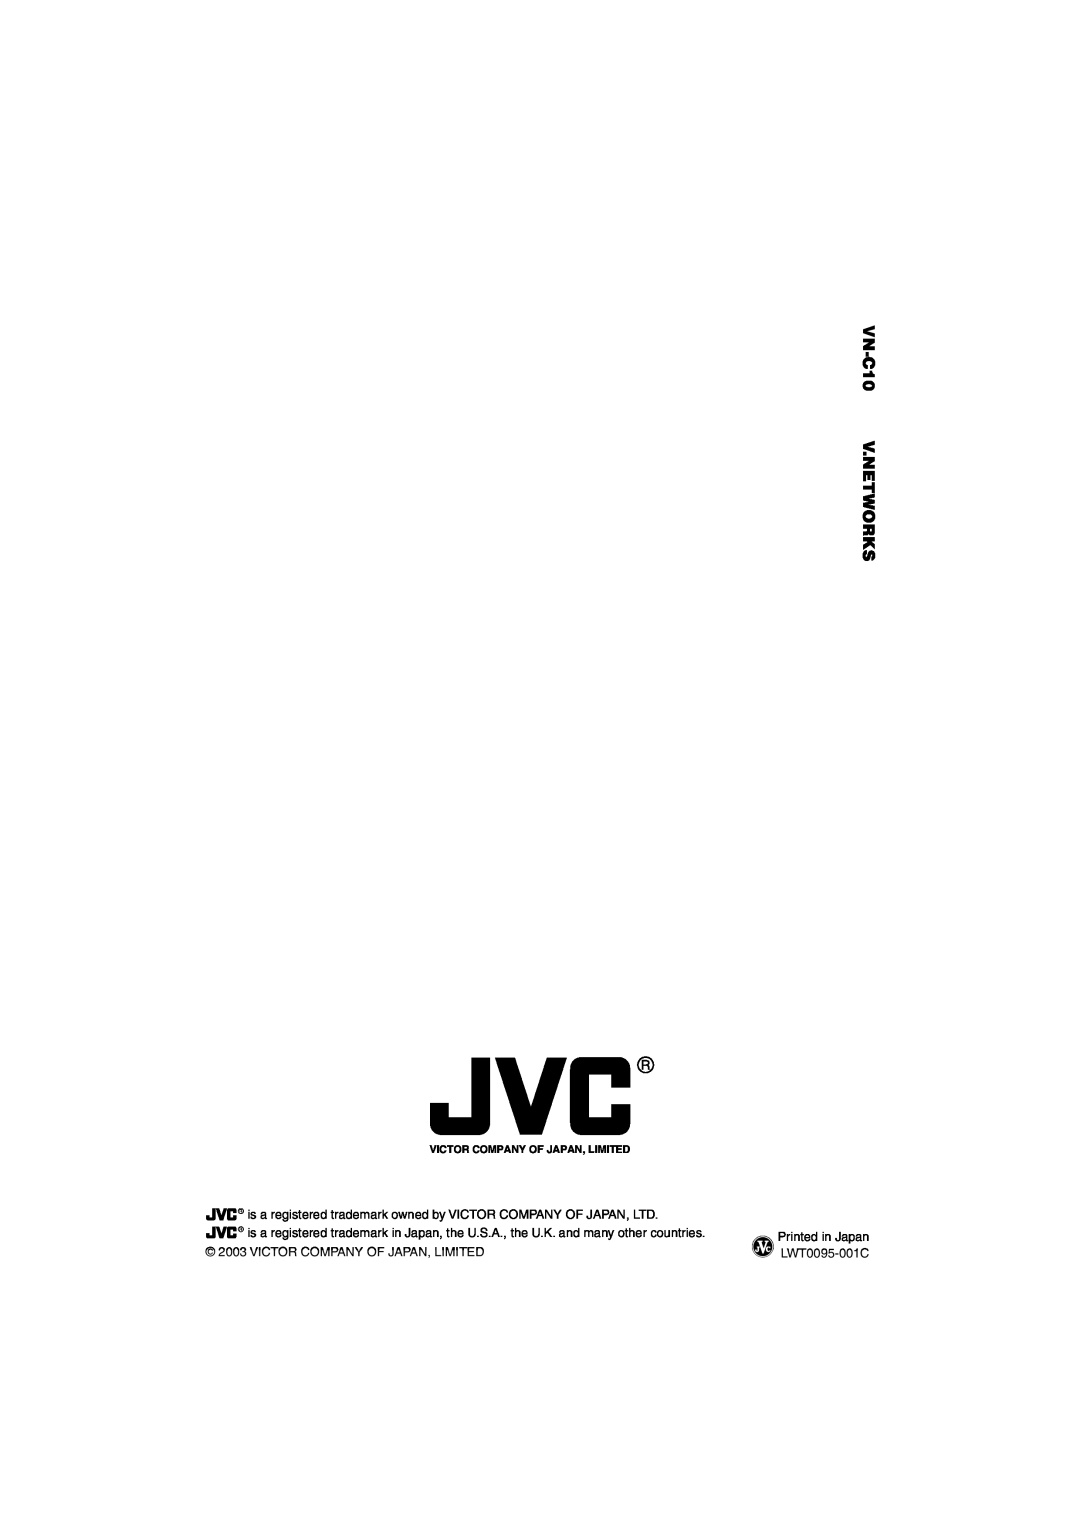 JVC manual VN-C10V.NETWORKS, Victor Company Of Japan, Limited, Printed in Japan LWT0095-001C 